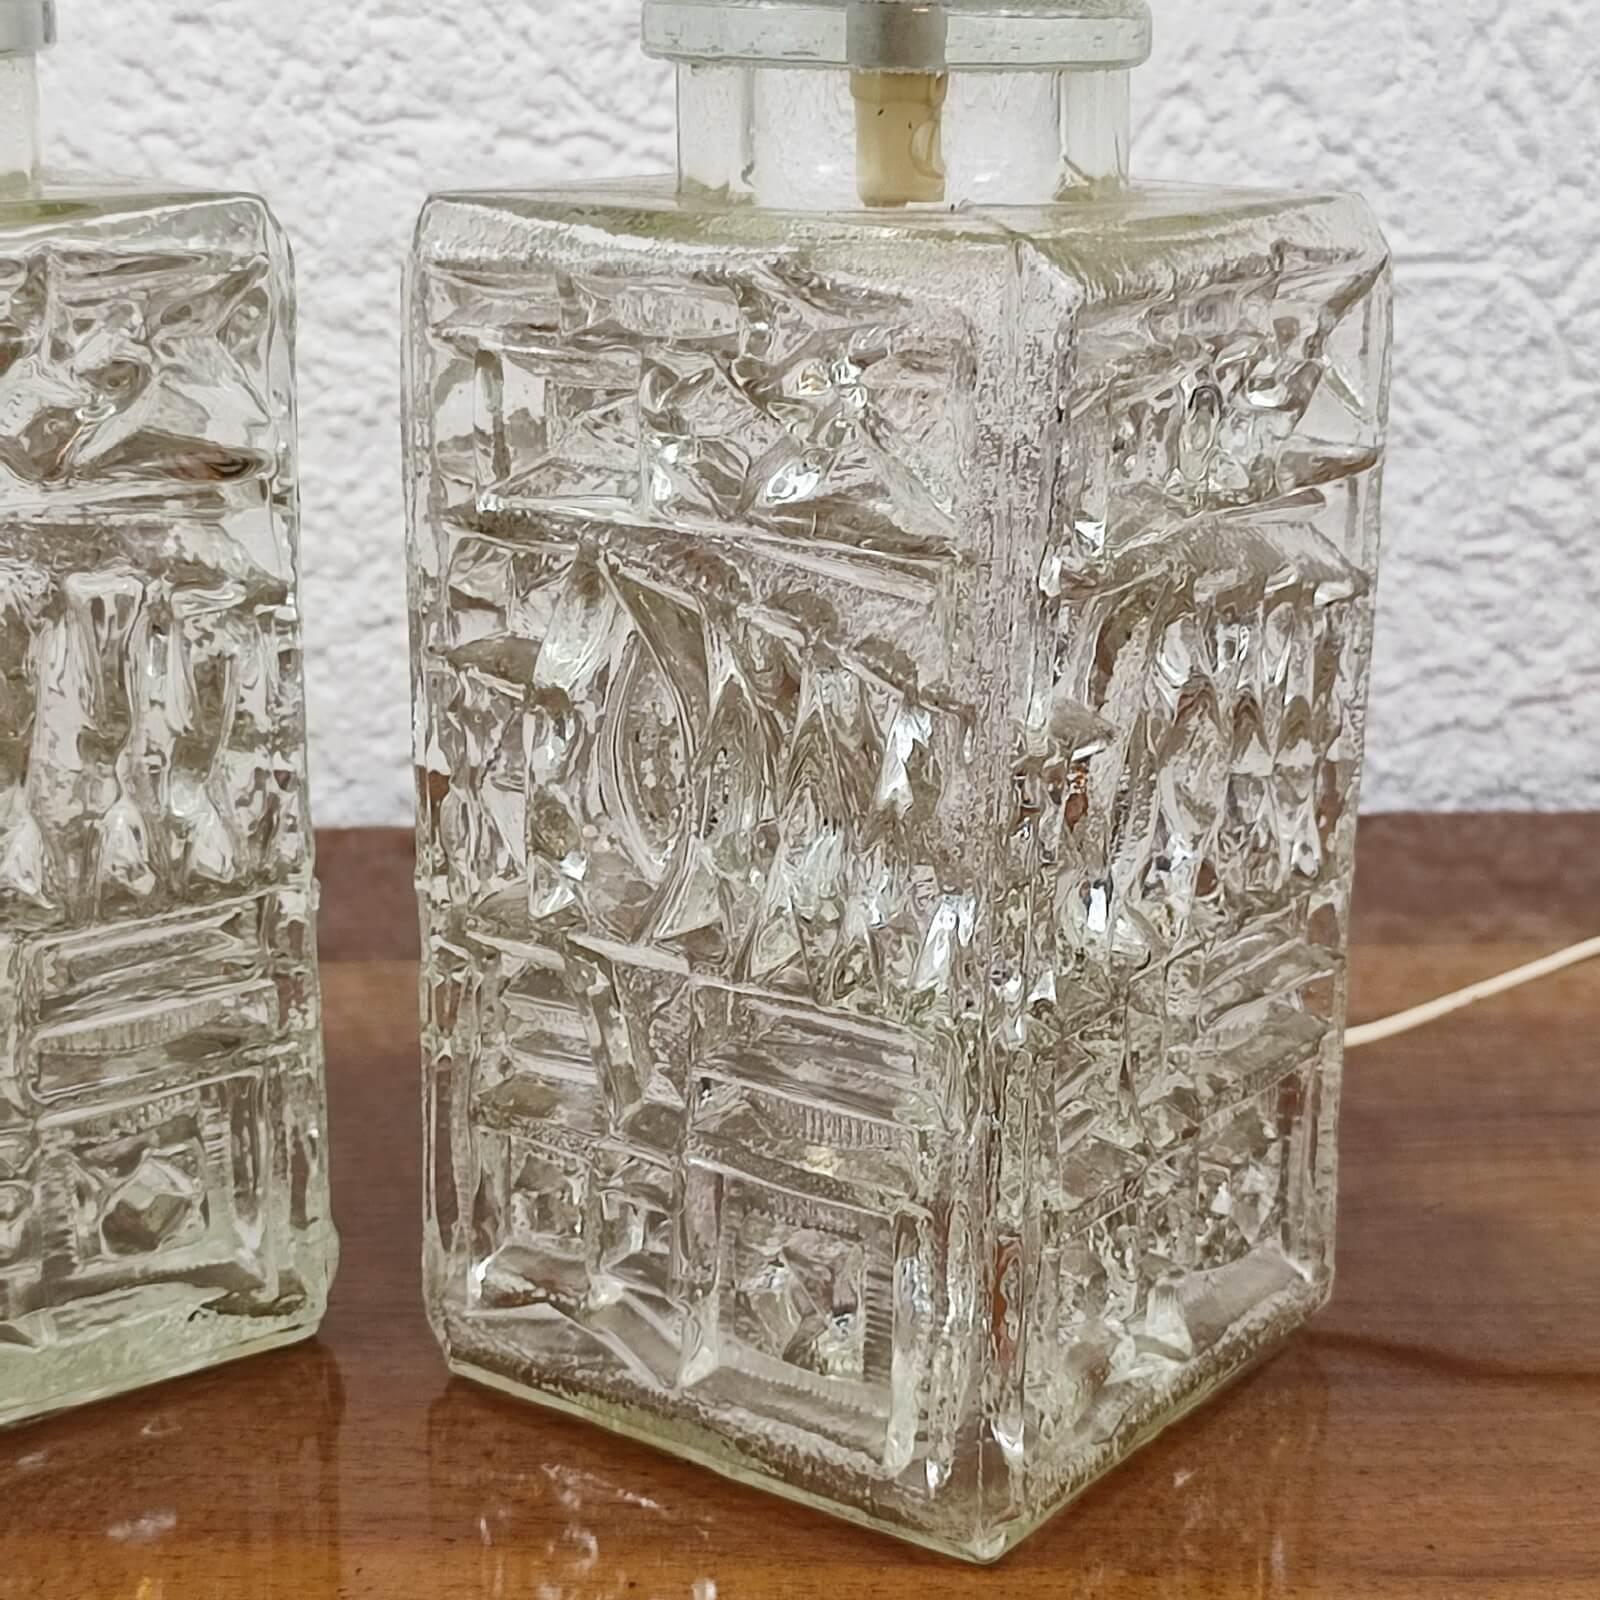 Pair of Crystal Block Lamps by Pukeberg, Sweden, 1960s For Sale 4